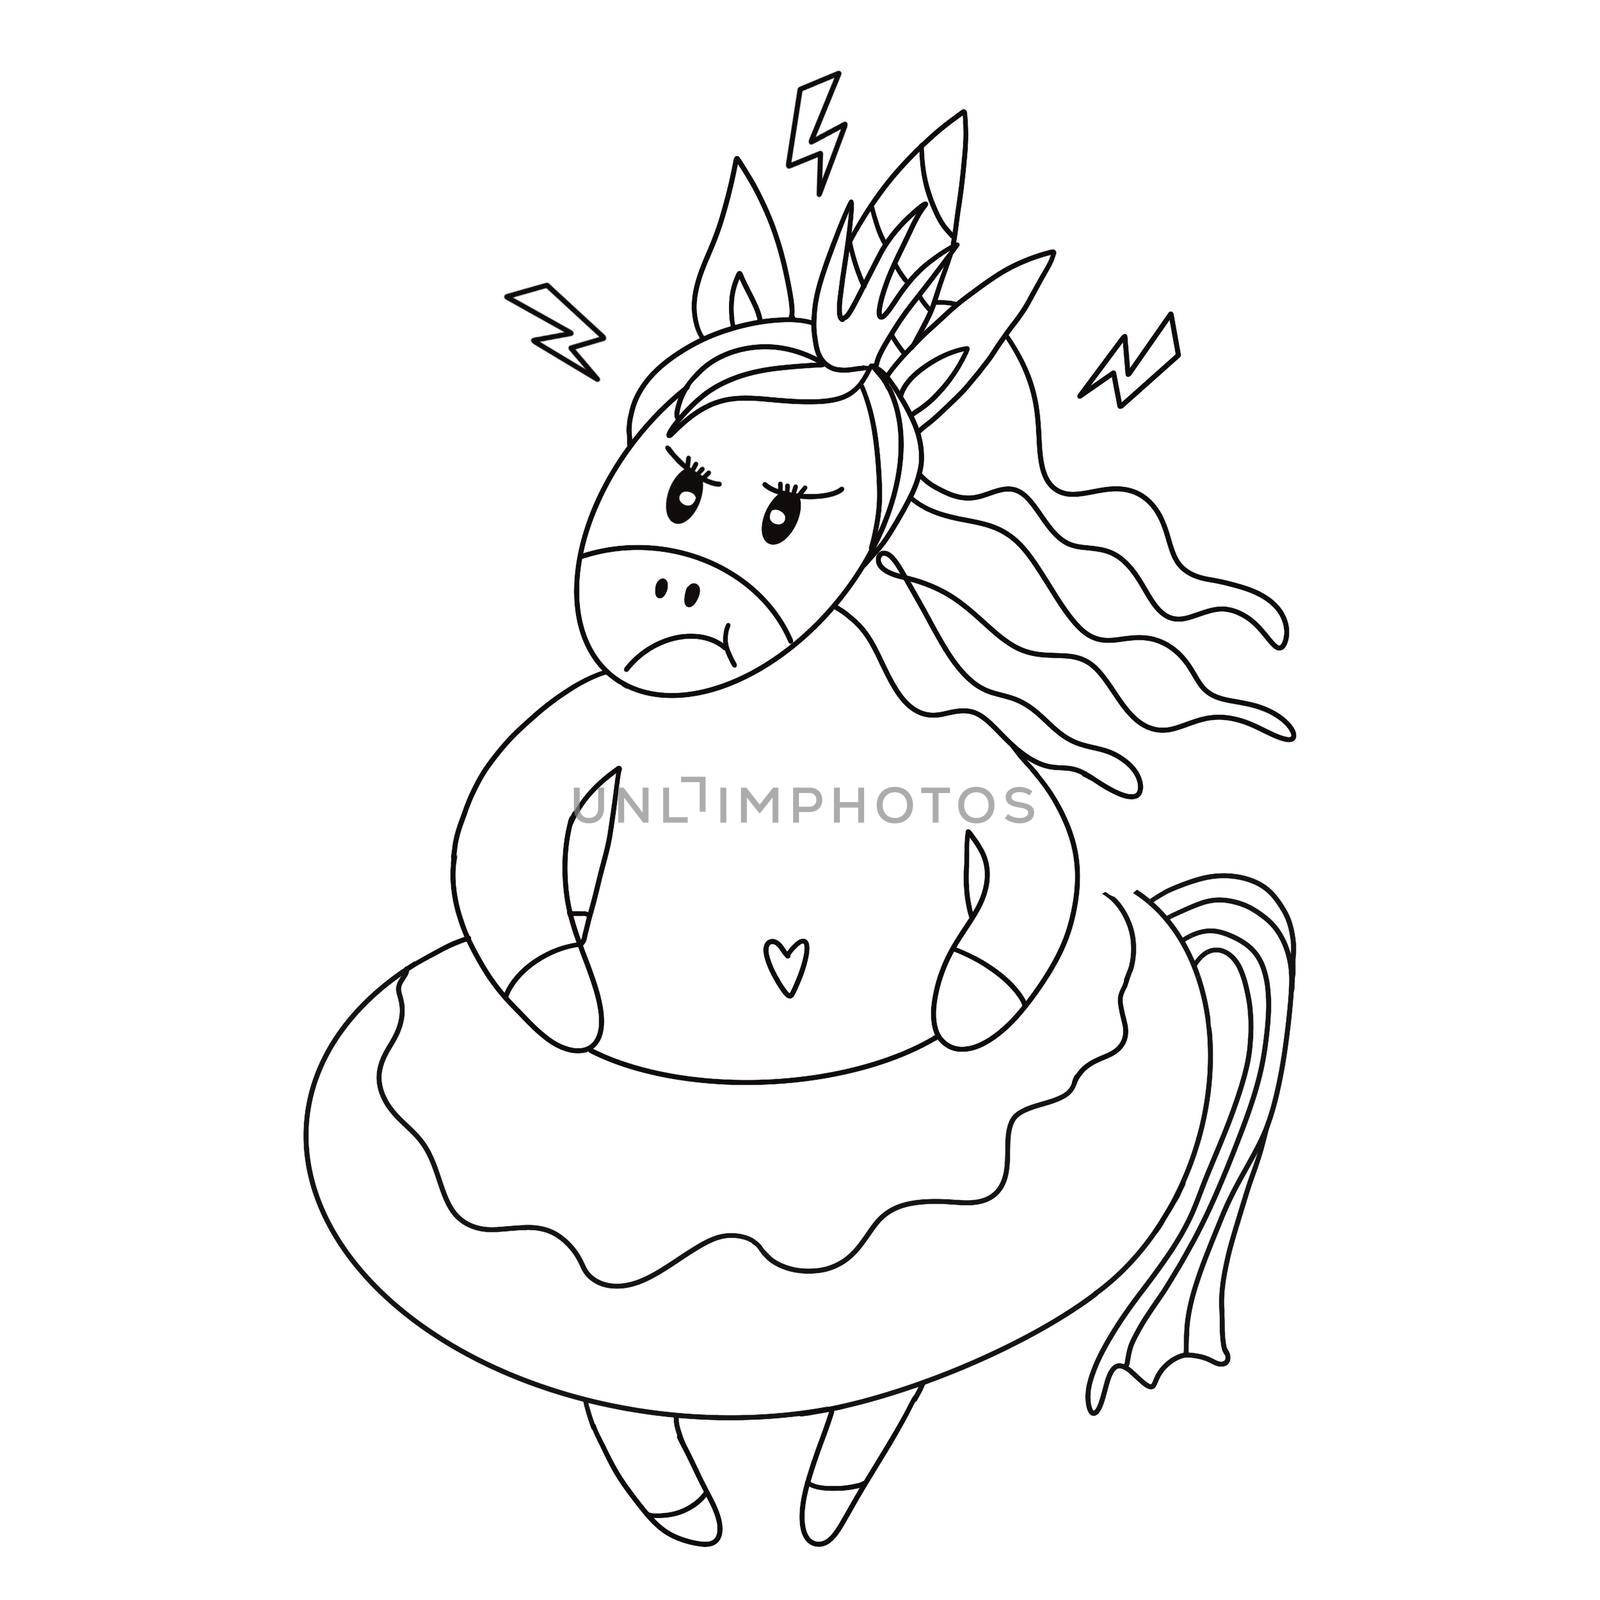 Coloring book. Cute cartoon unicorn. illustration depicting the emotion of anger. White background.